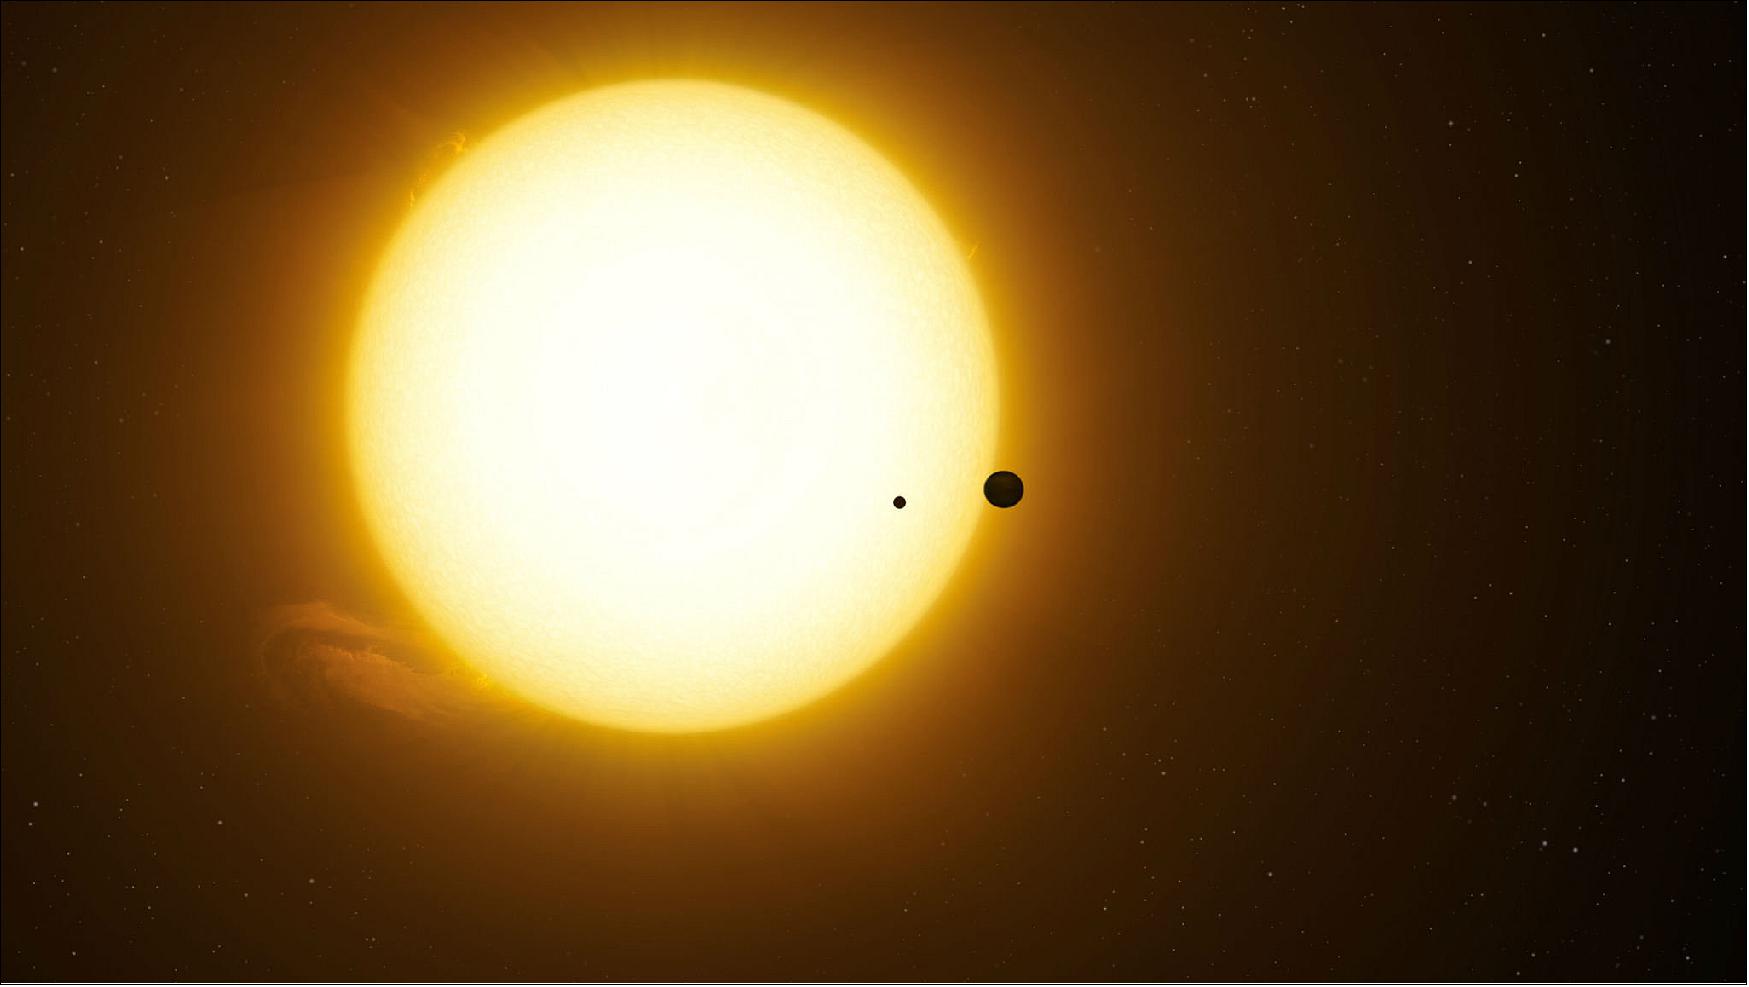 Figure 19: Artist’s impression of the exoplanet Kepler-1625b transiting the star with the candidate exomoon in tow (image credit: Dan Durda)